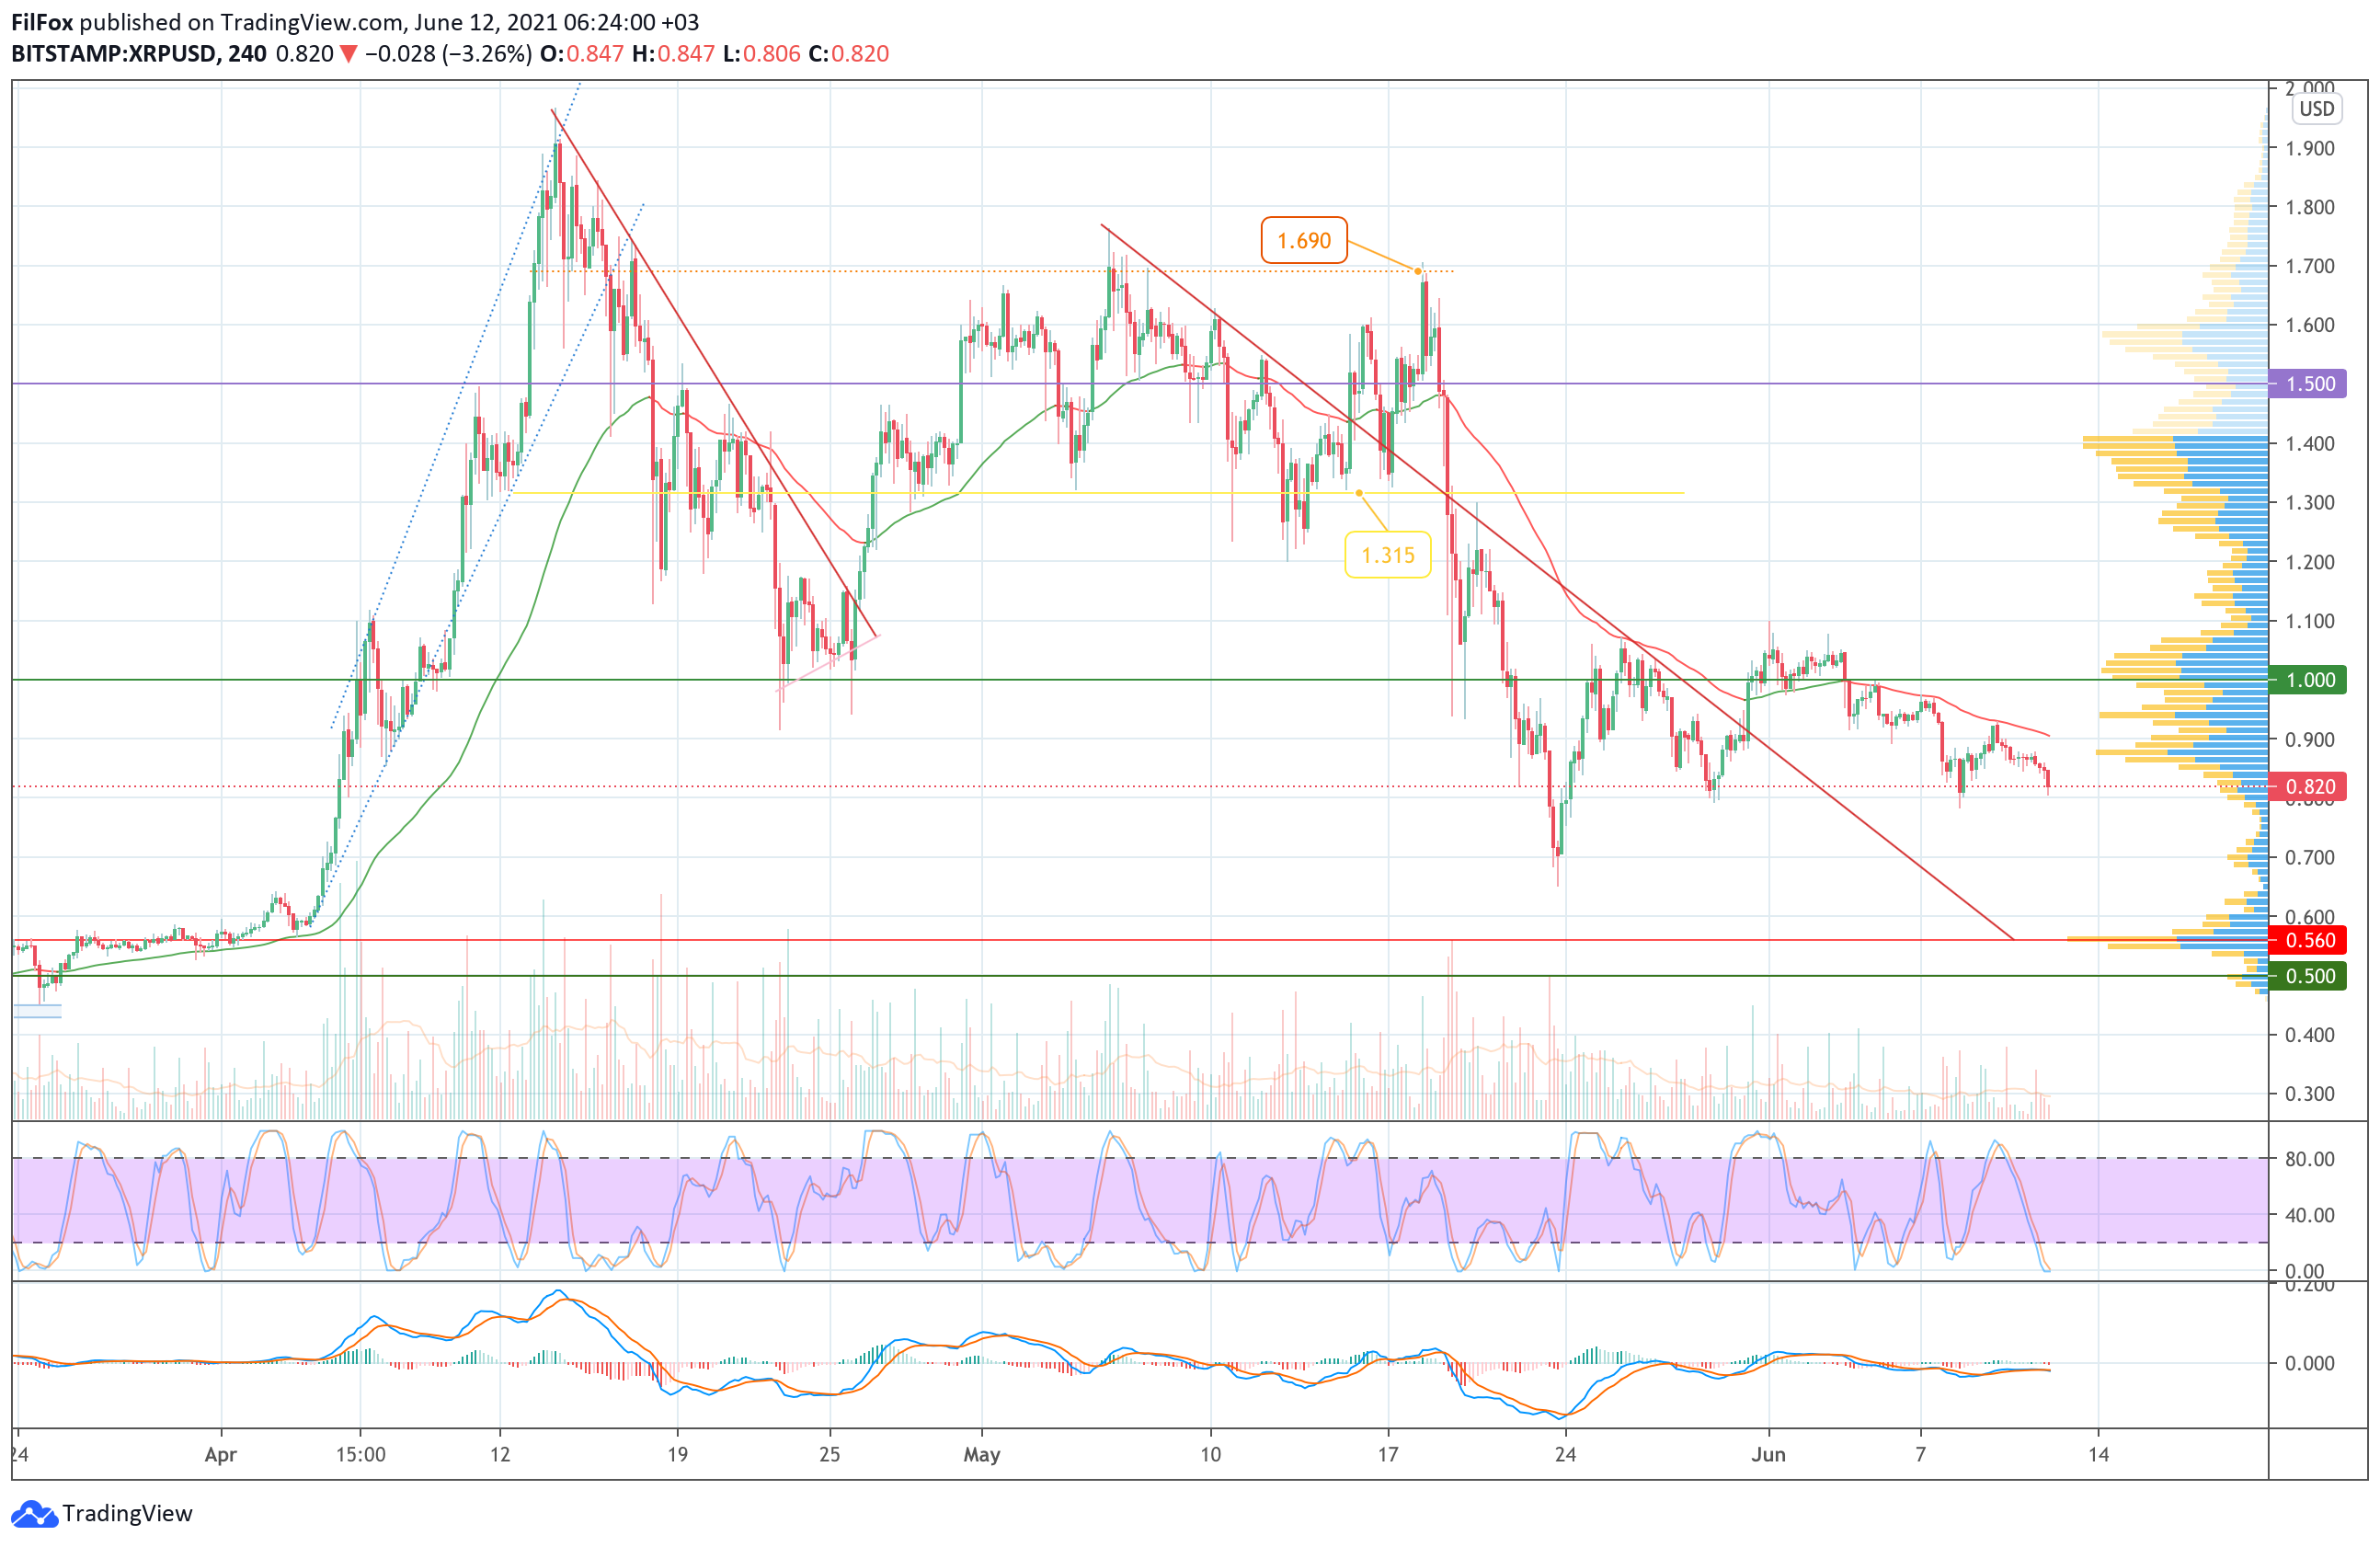 Analysis of prices for Bitcoin, Ethereum, XRP for 06/12/2021